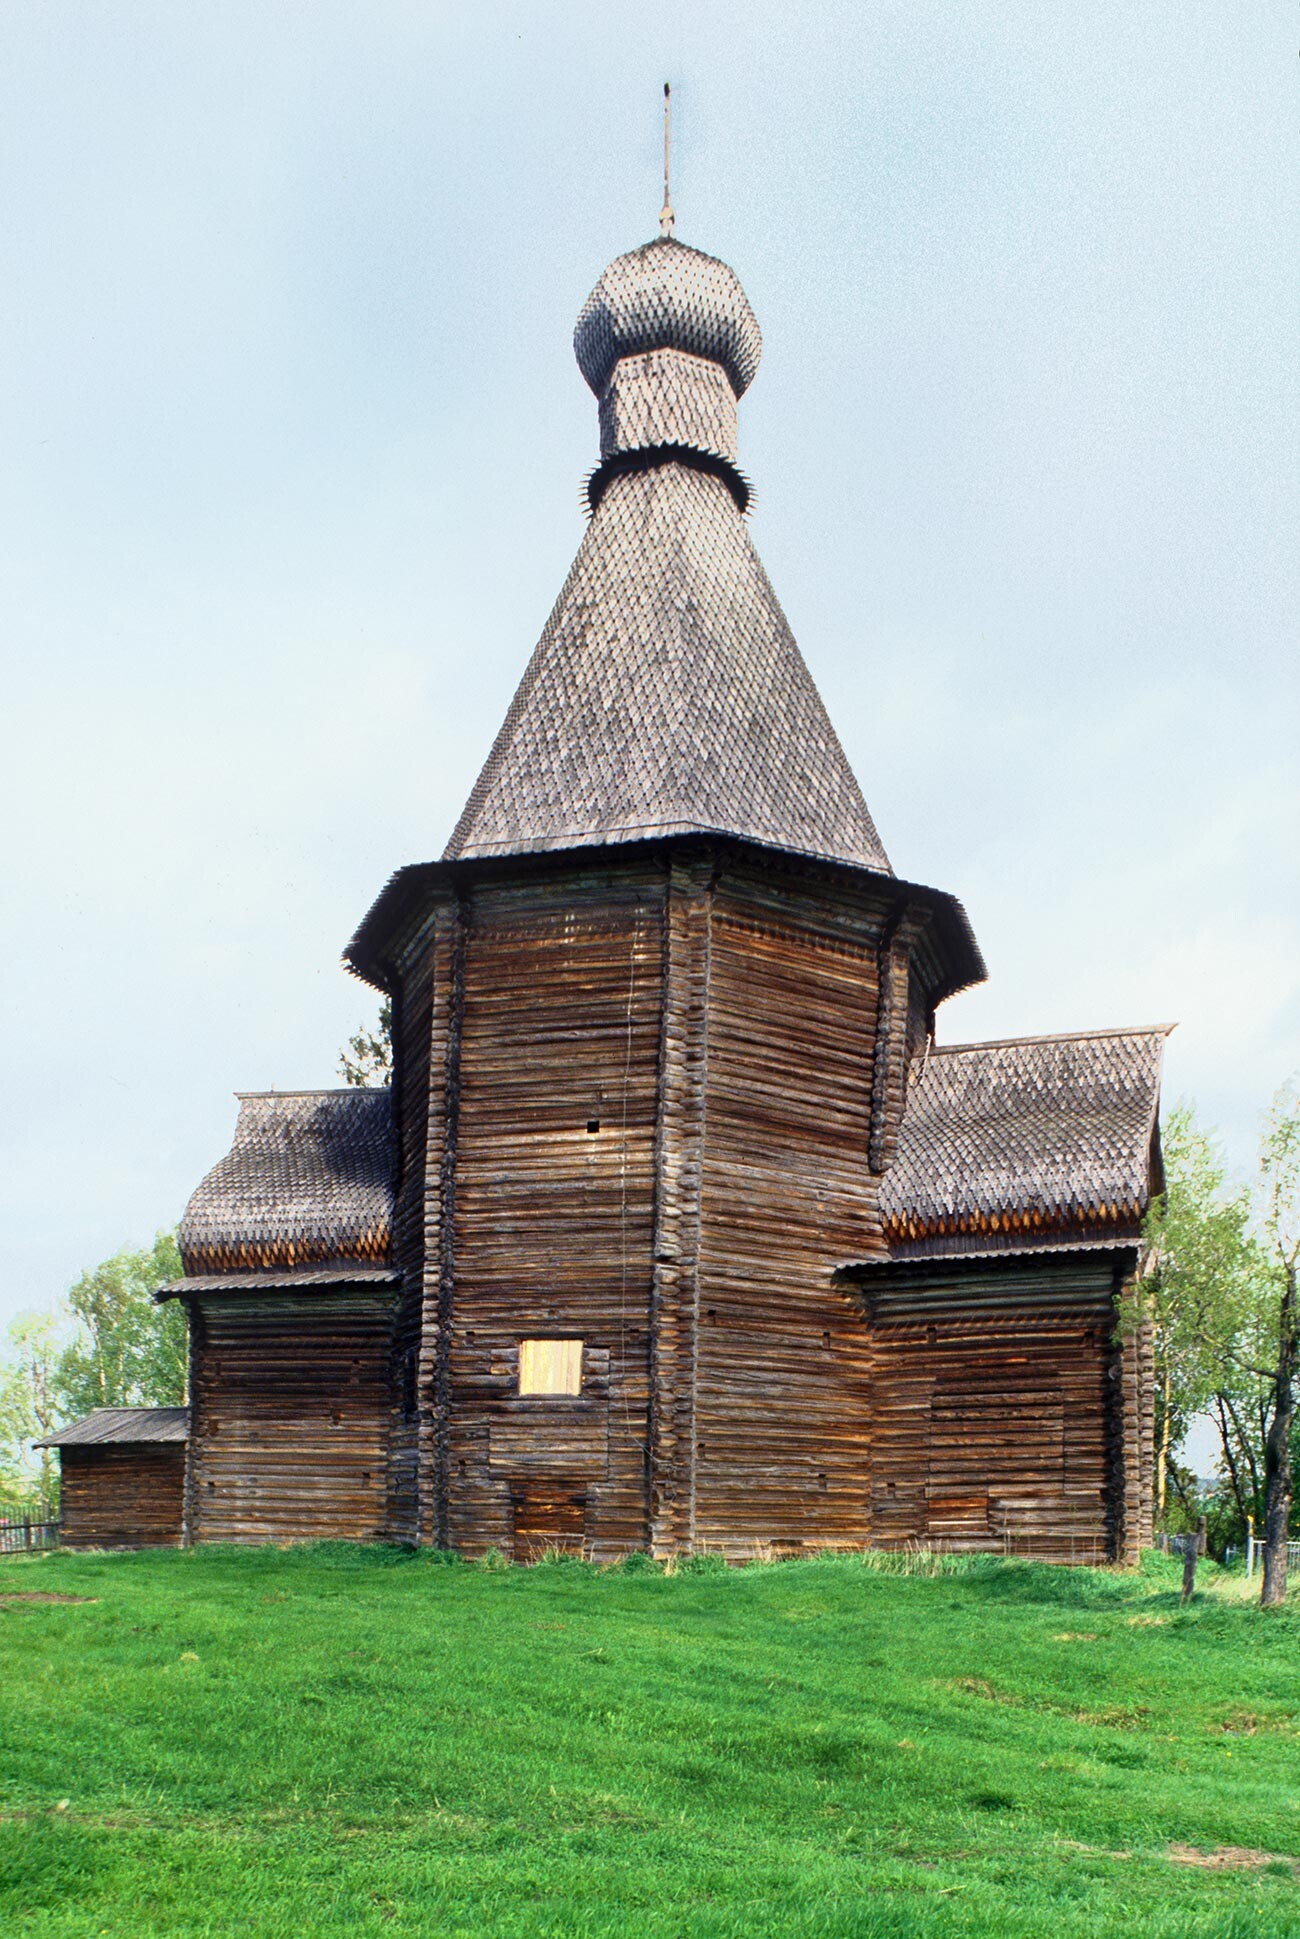 Liavlia (Khorkovo). Church of St. Nicholas. South view with apse extension on the right. June 9, 1998